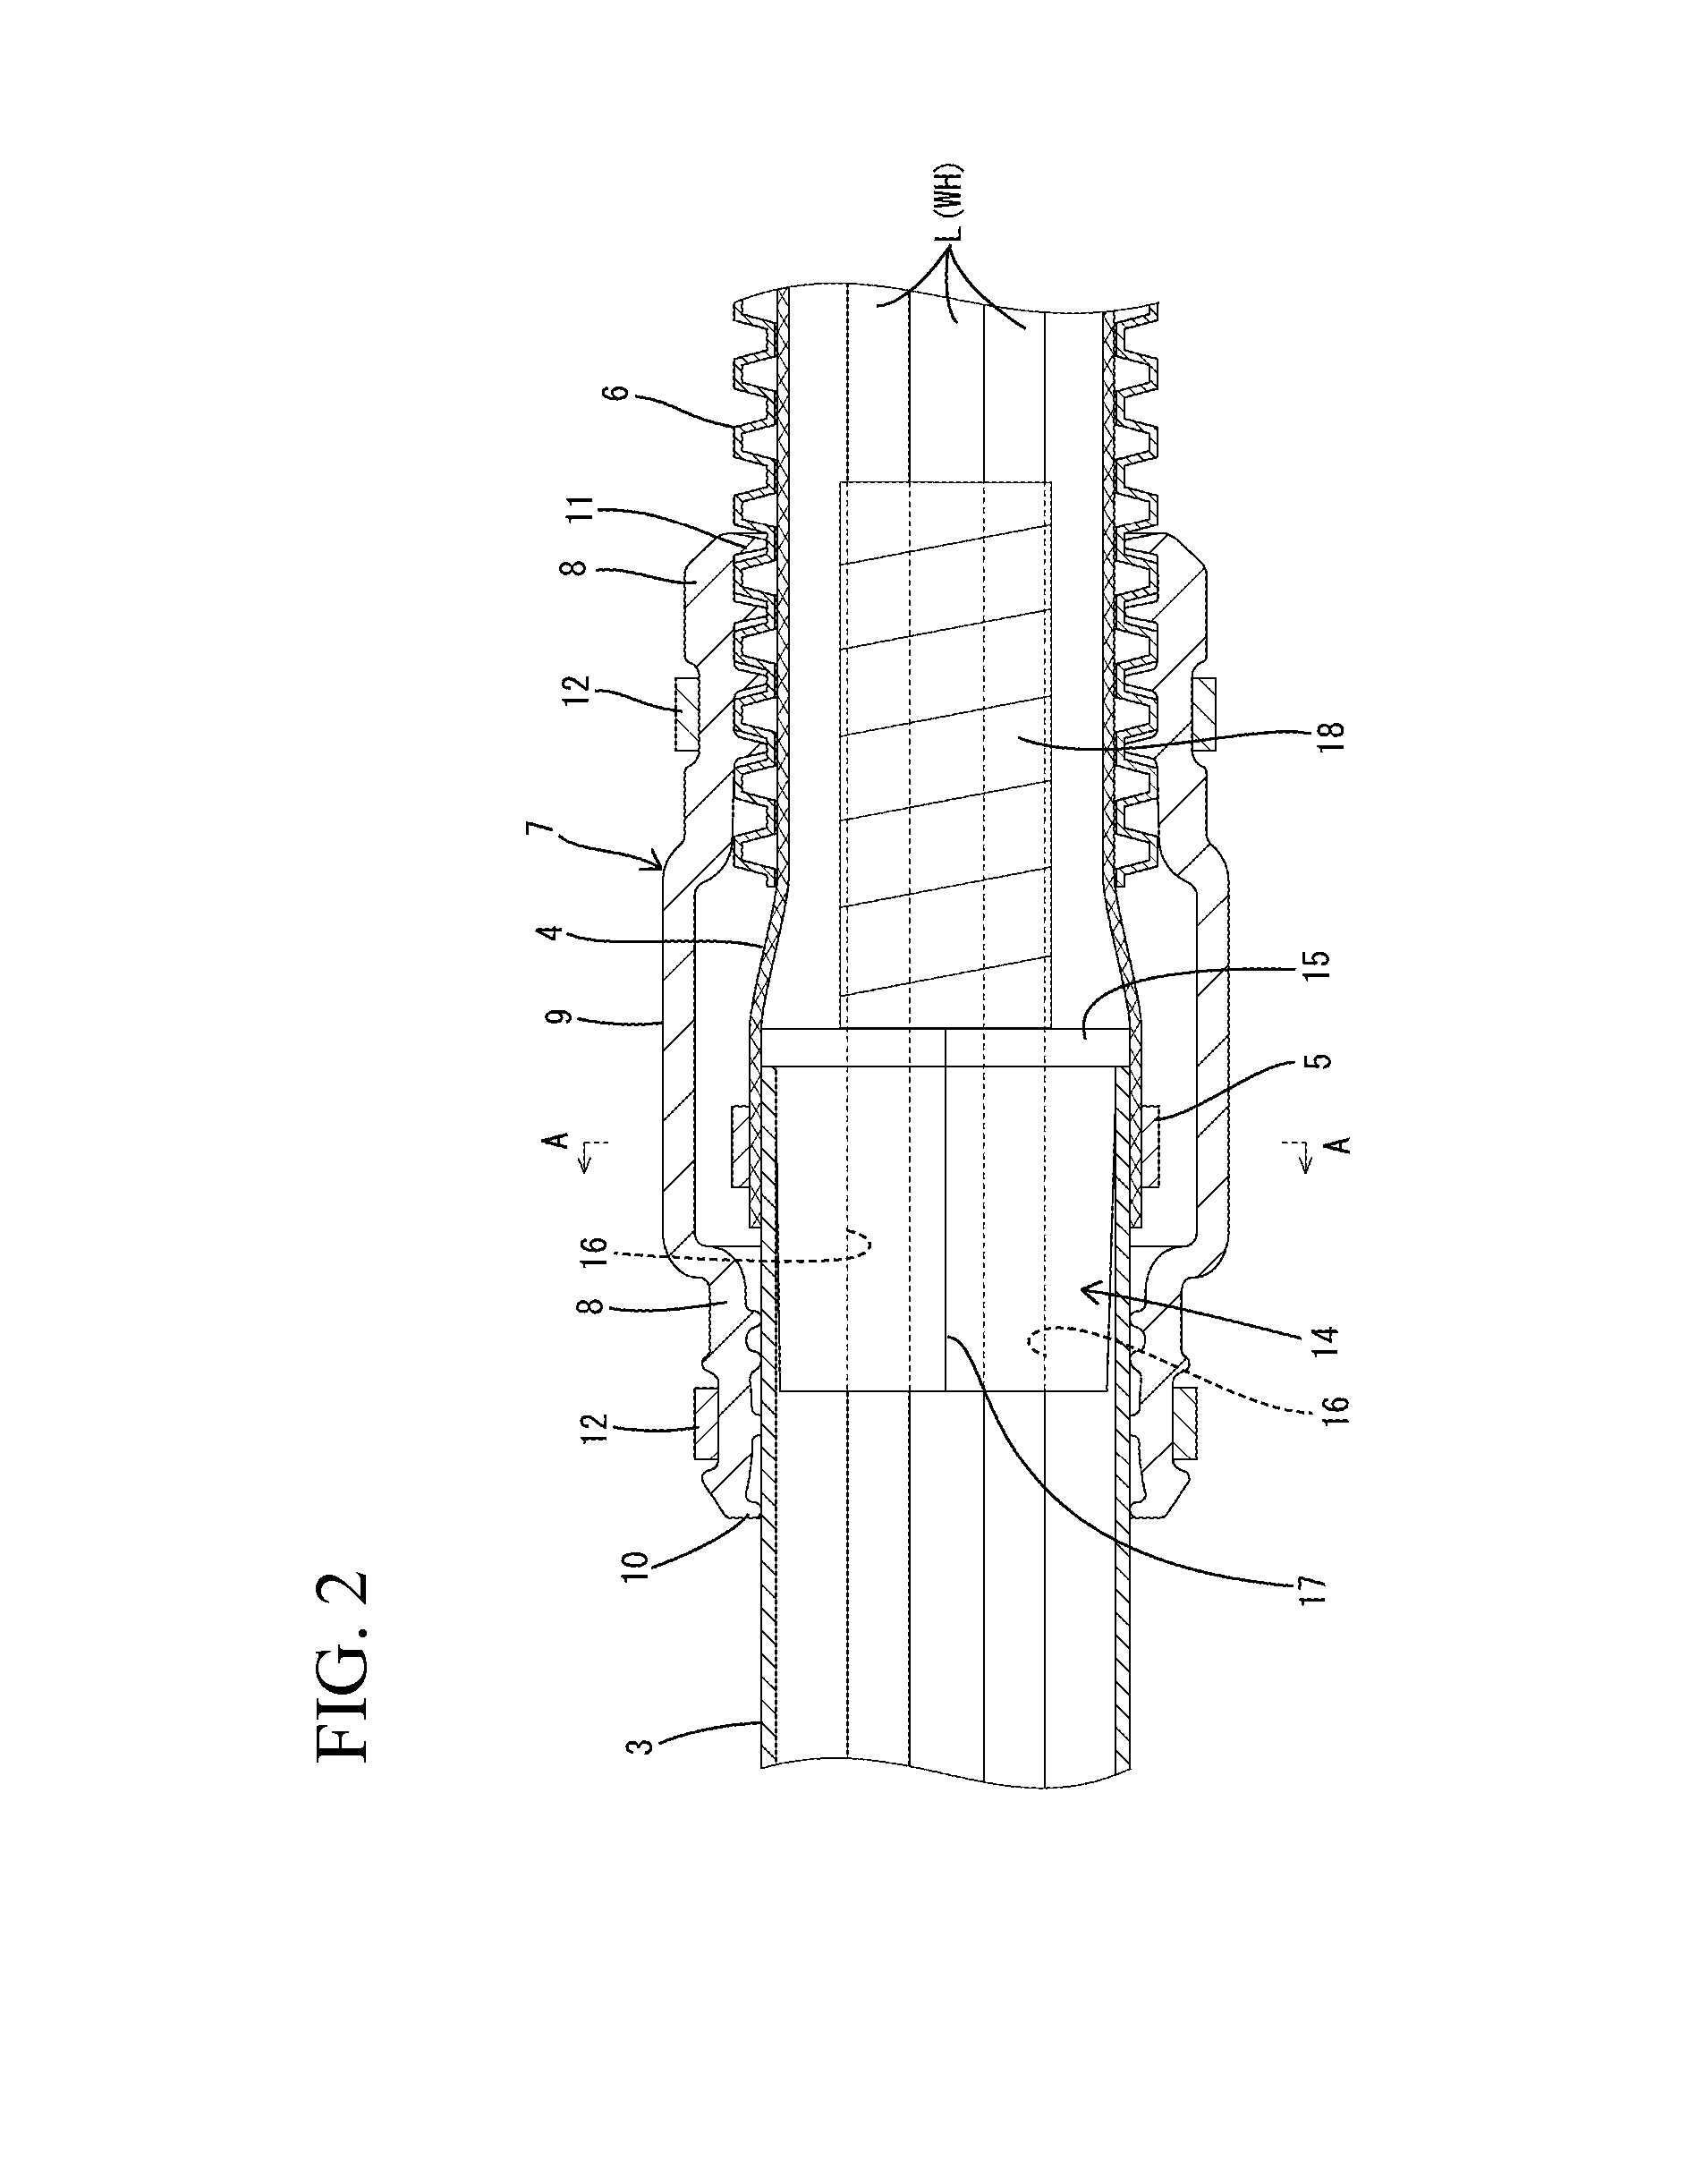 Seal structure for wire harness